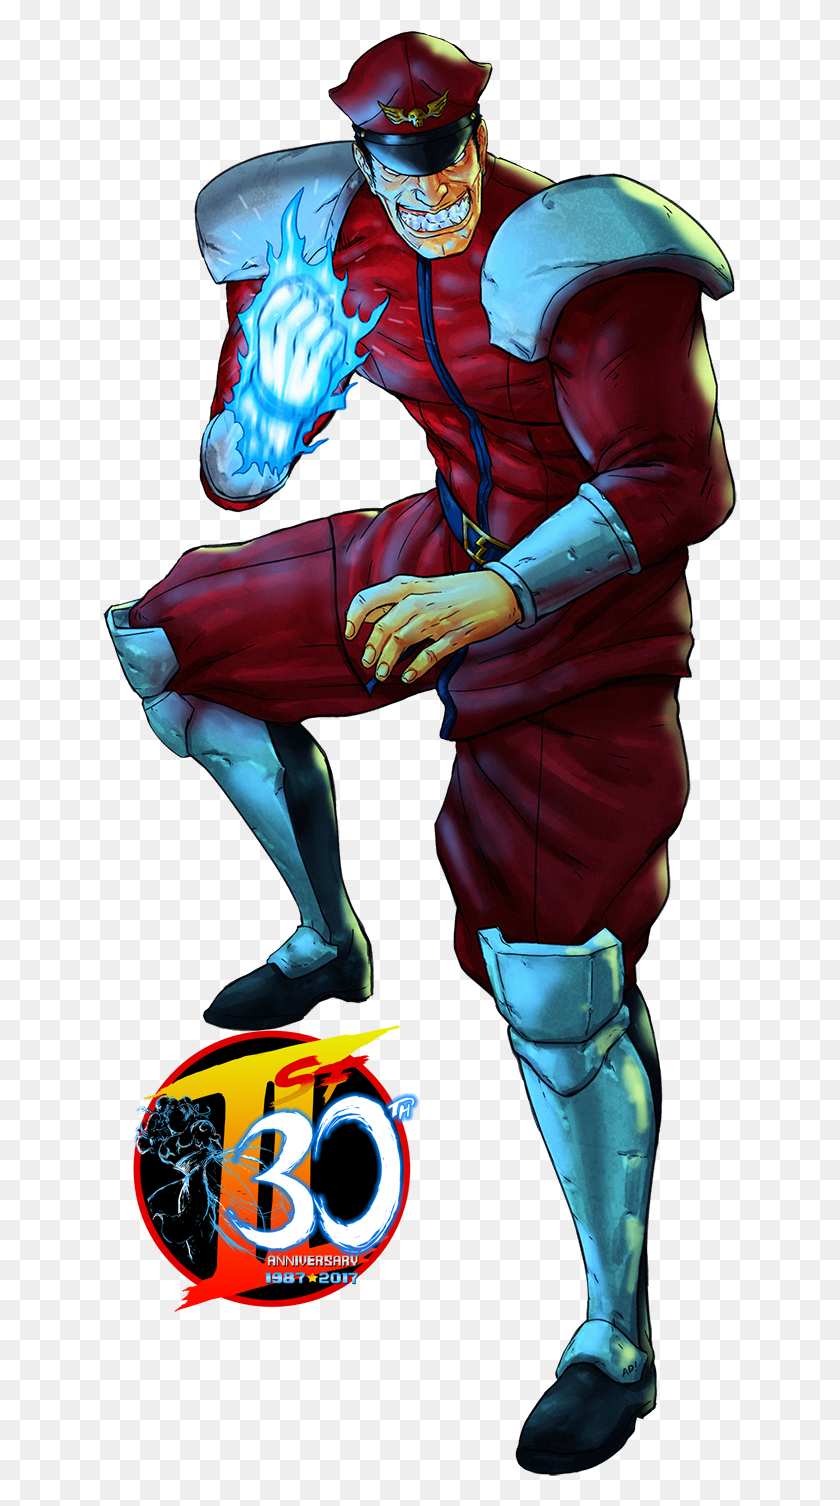 635x1446 Our Street Fighter Tribute - Street Fighter PNG